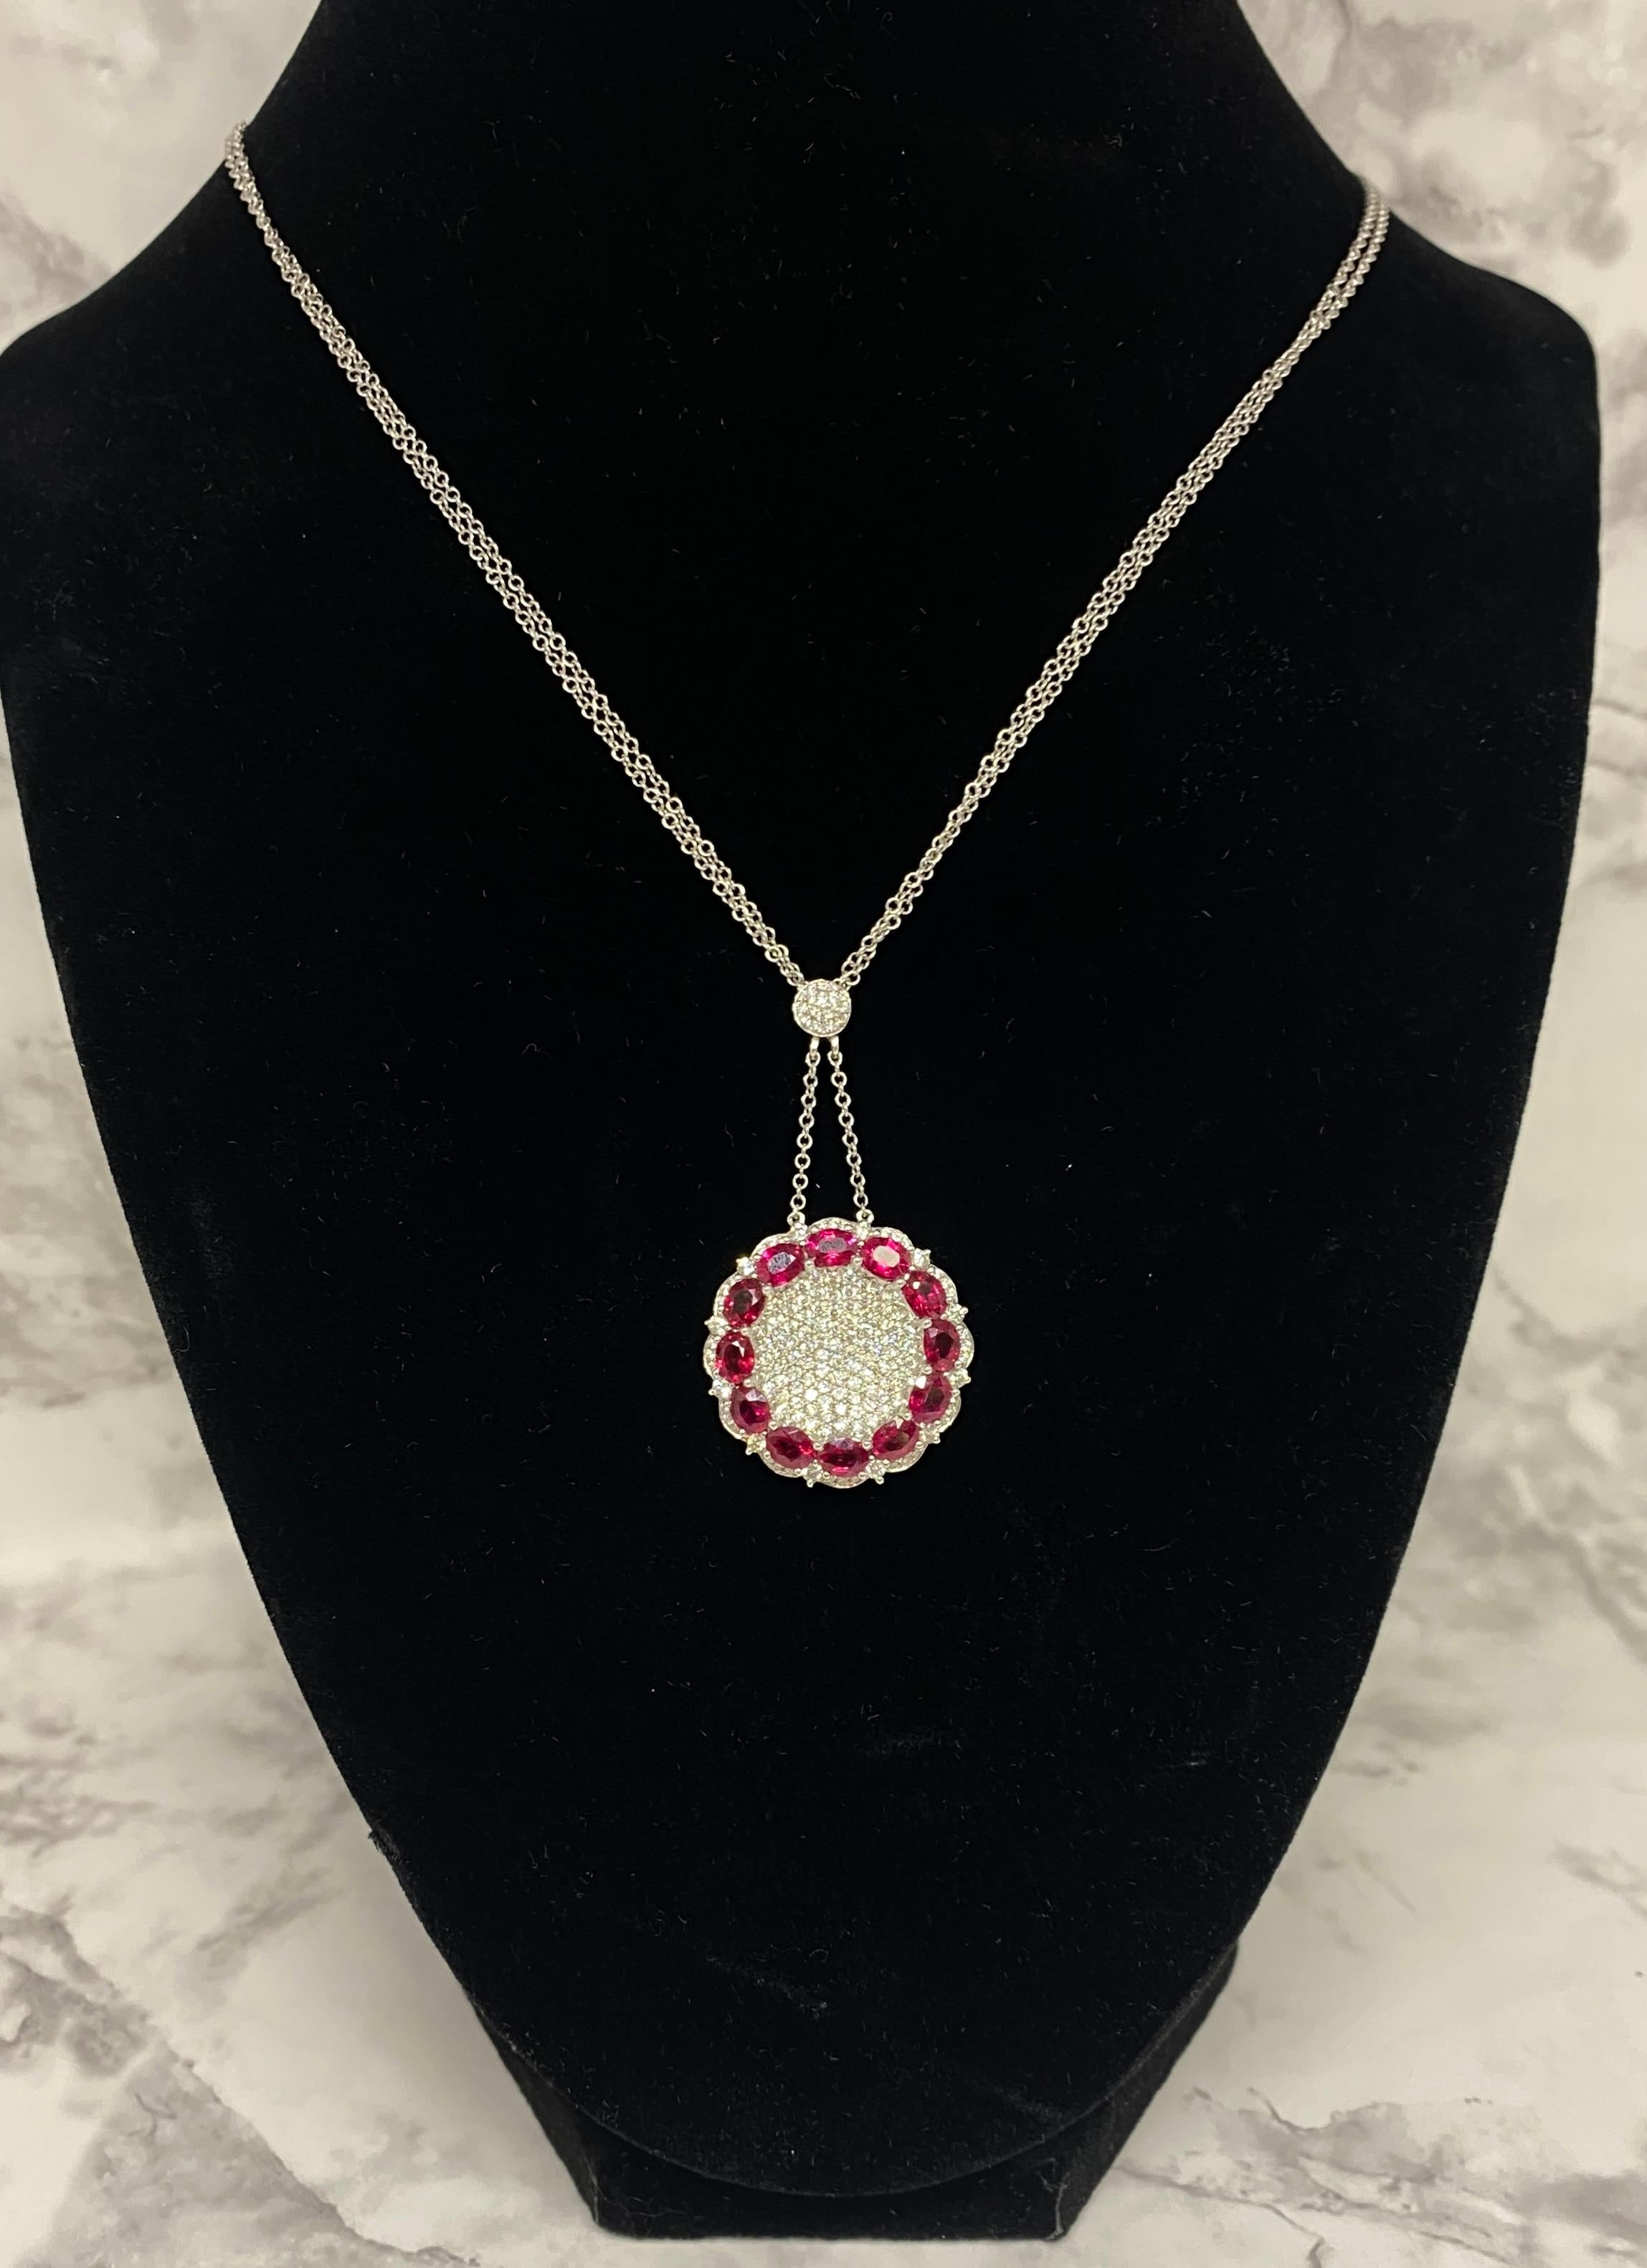 14k White Gold 5.04cttw Natural Ruby & Diamond Round Pendant Necklace  For Sale 5